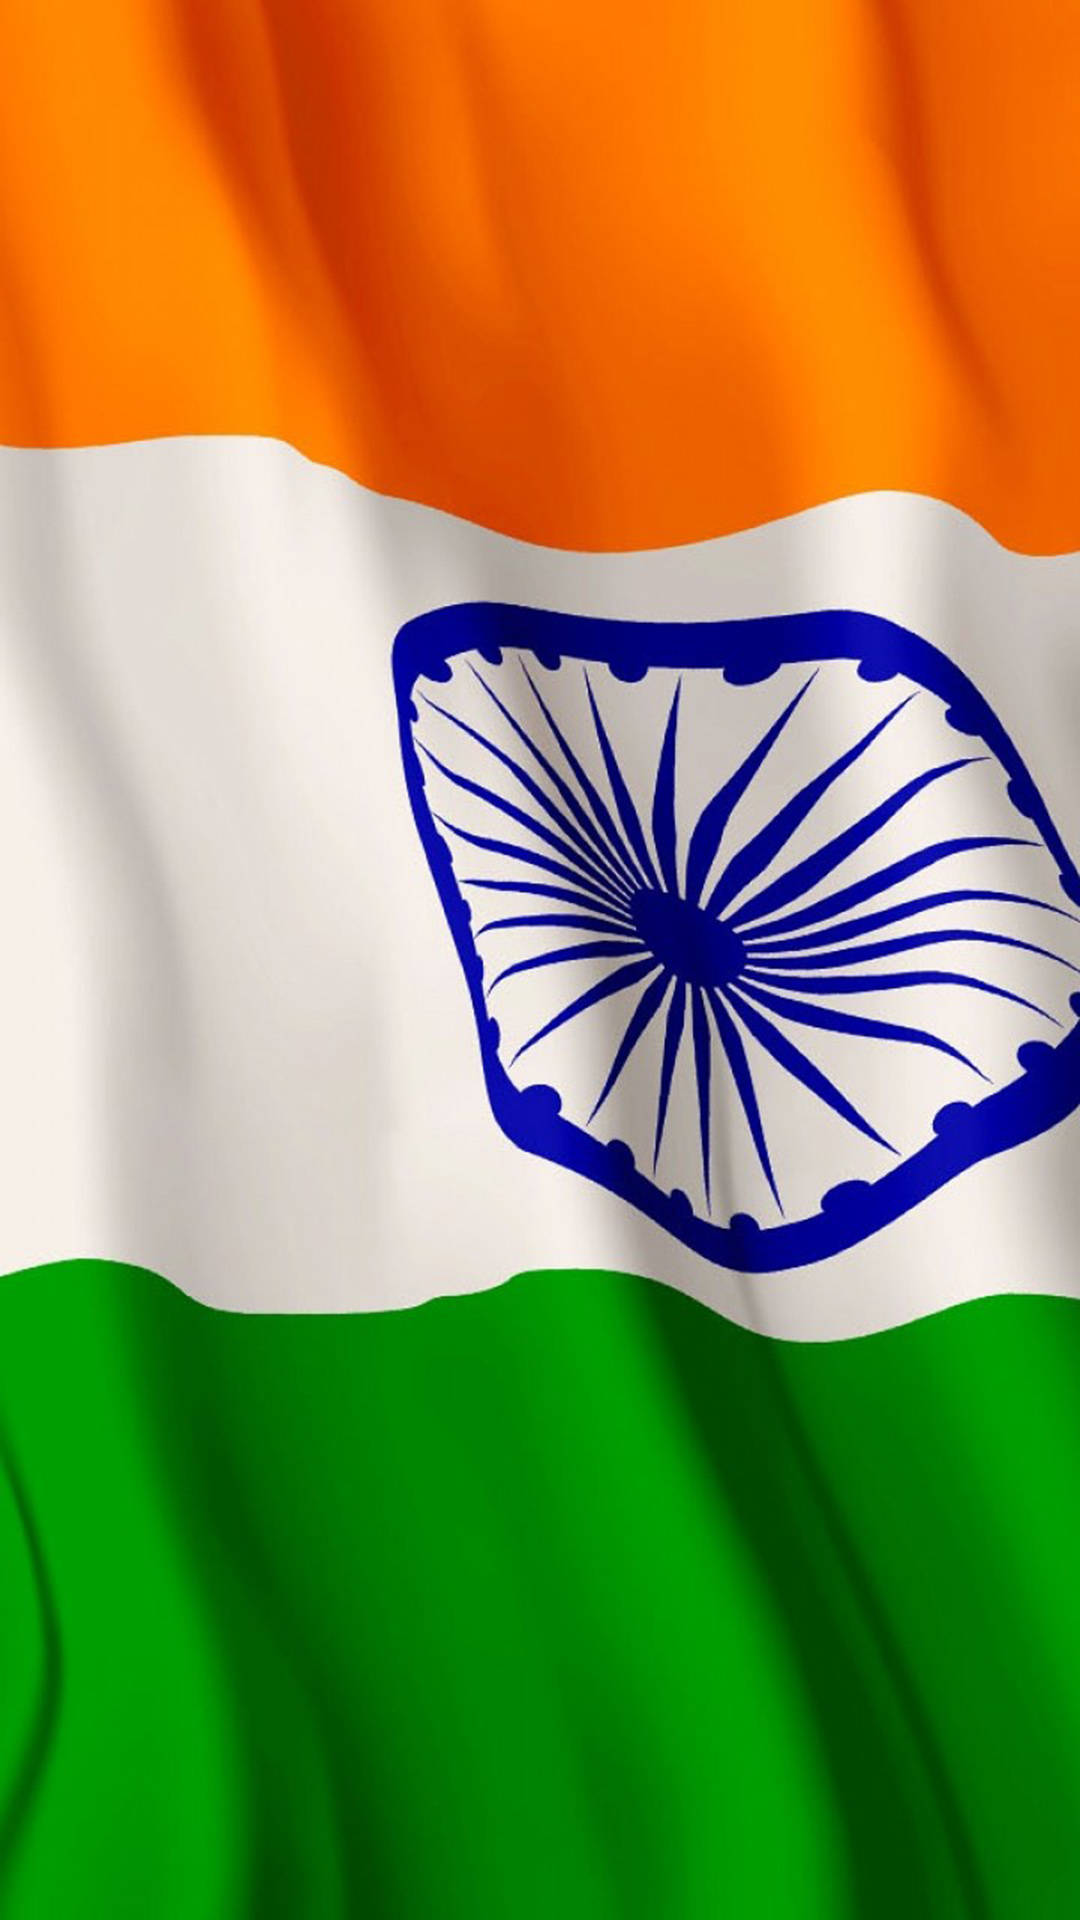 Proud Colors - The Wavy Indian Flag